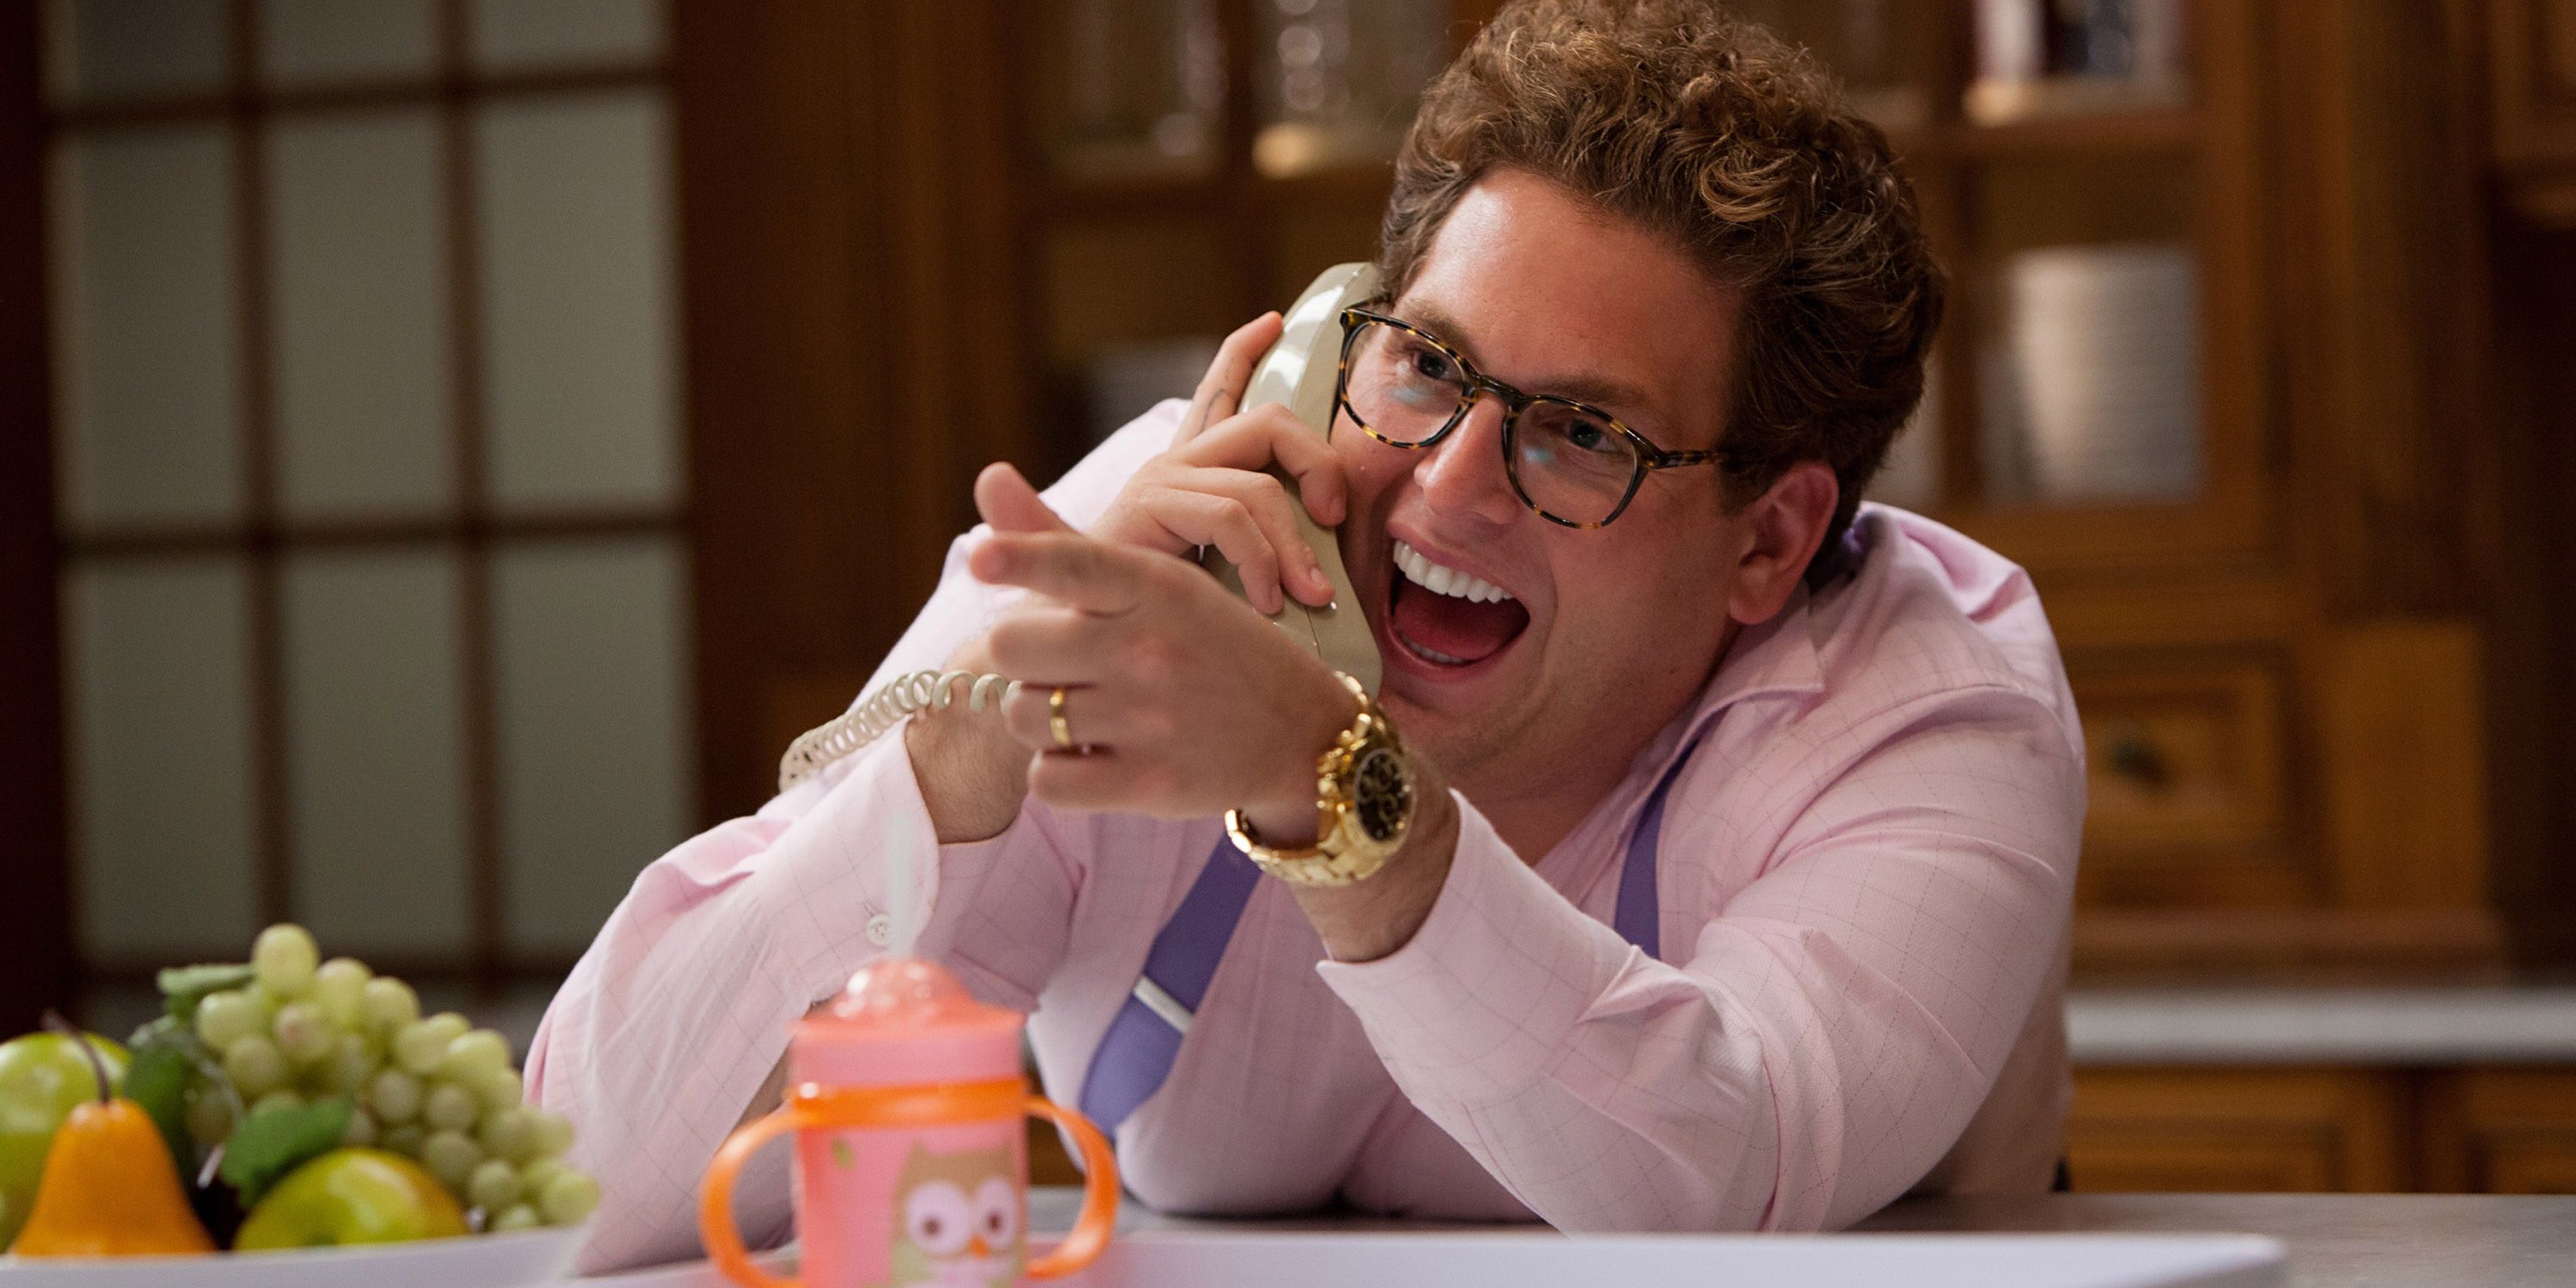 Jonah Hill on the phone in The Wolf of Wall Street